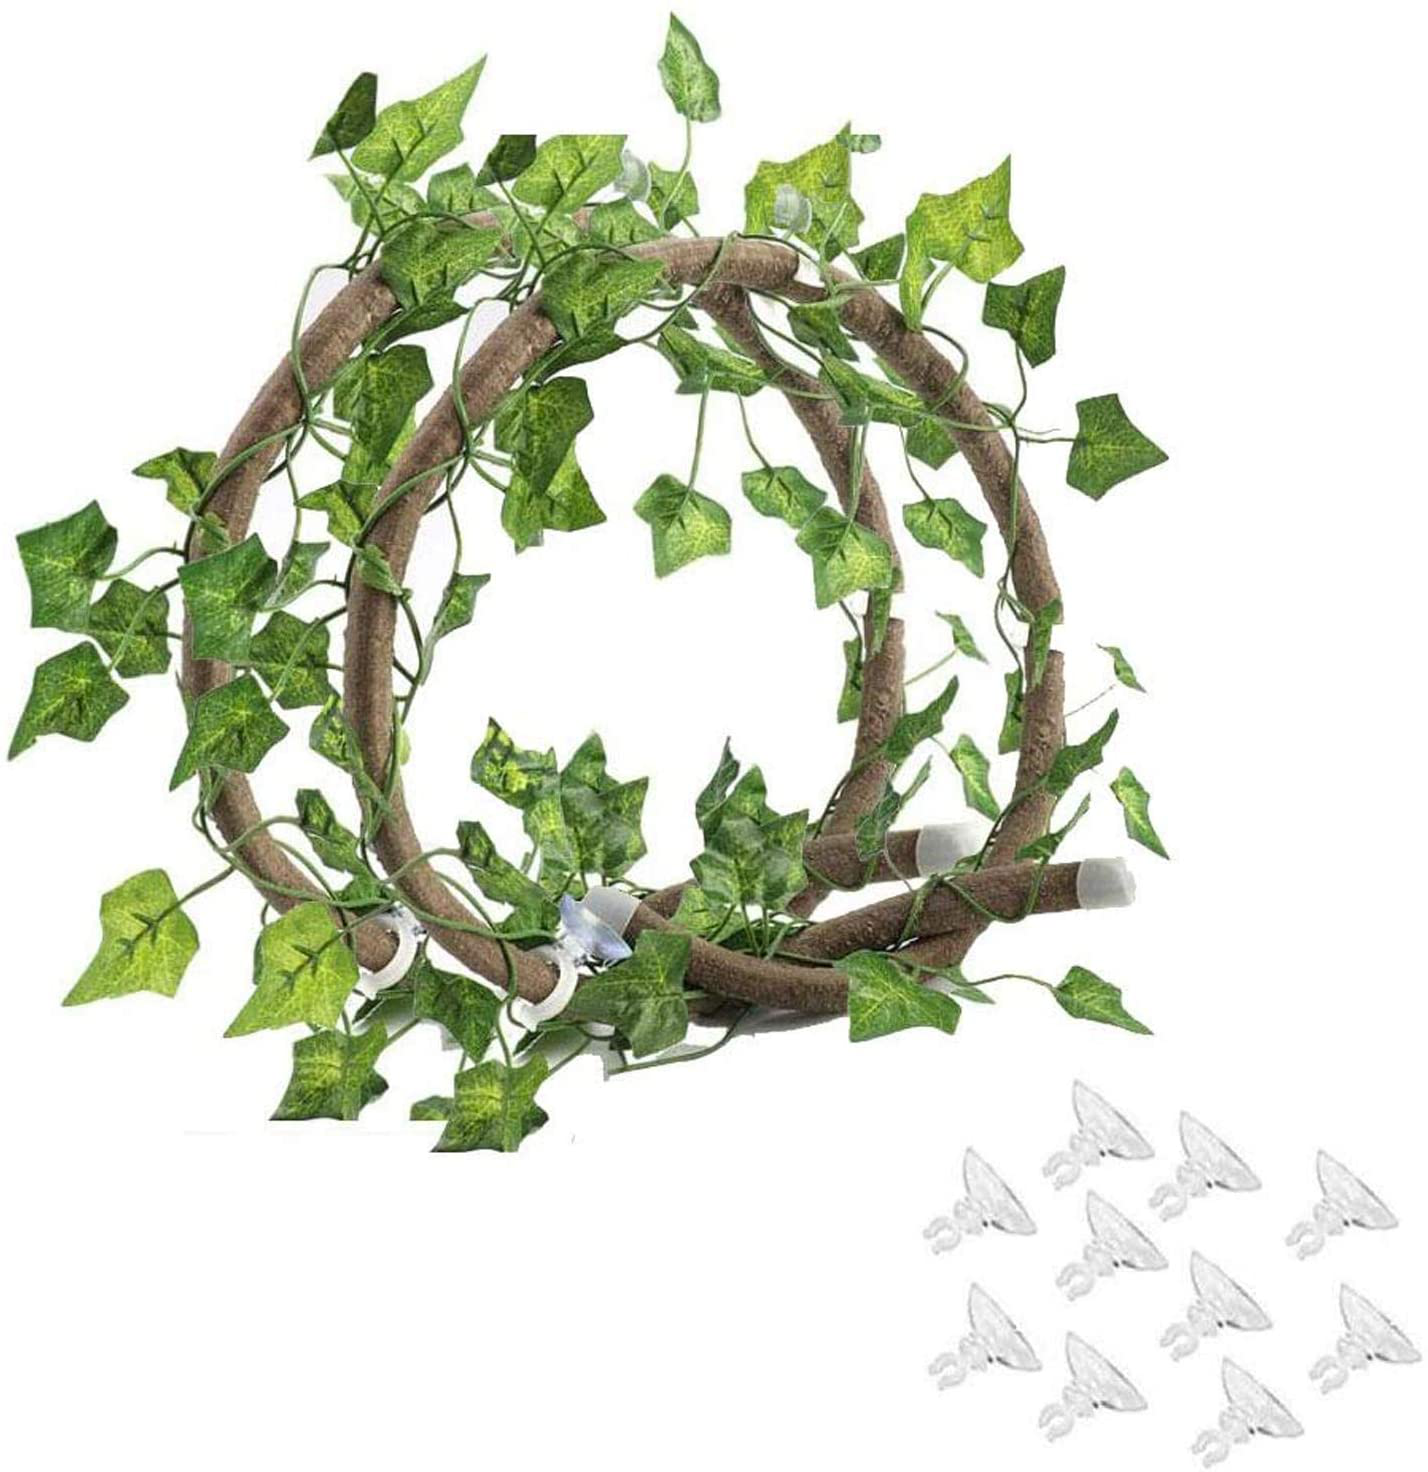 Tfwadmx Reptiles Jungle Vines Bend a Branch Ivy 4Pcs Artificial Fake Leaves Habitat Ornaments for Chameleons, Snakes, Lizards, Frogs